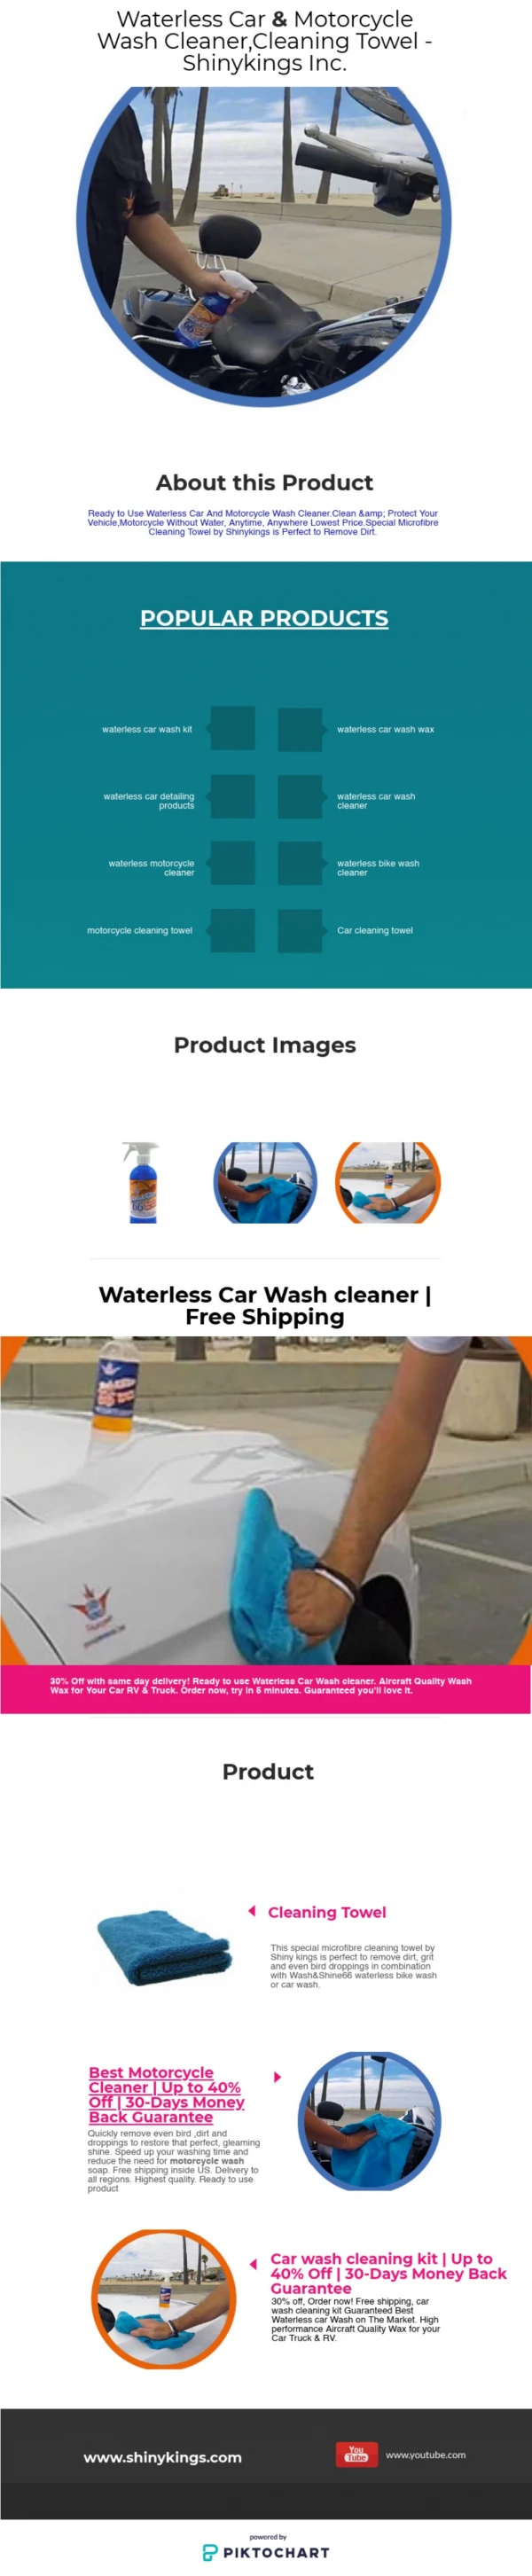 Waterless Car Wash cleaner | Free Shipping